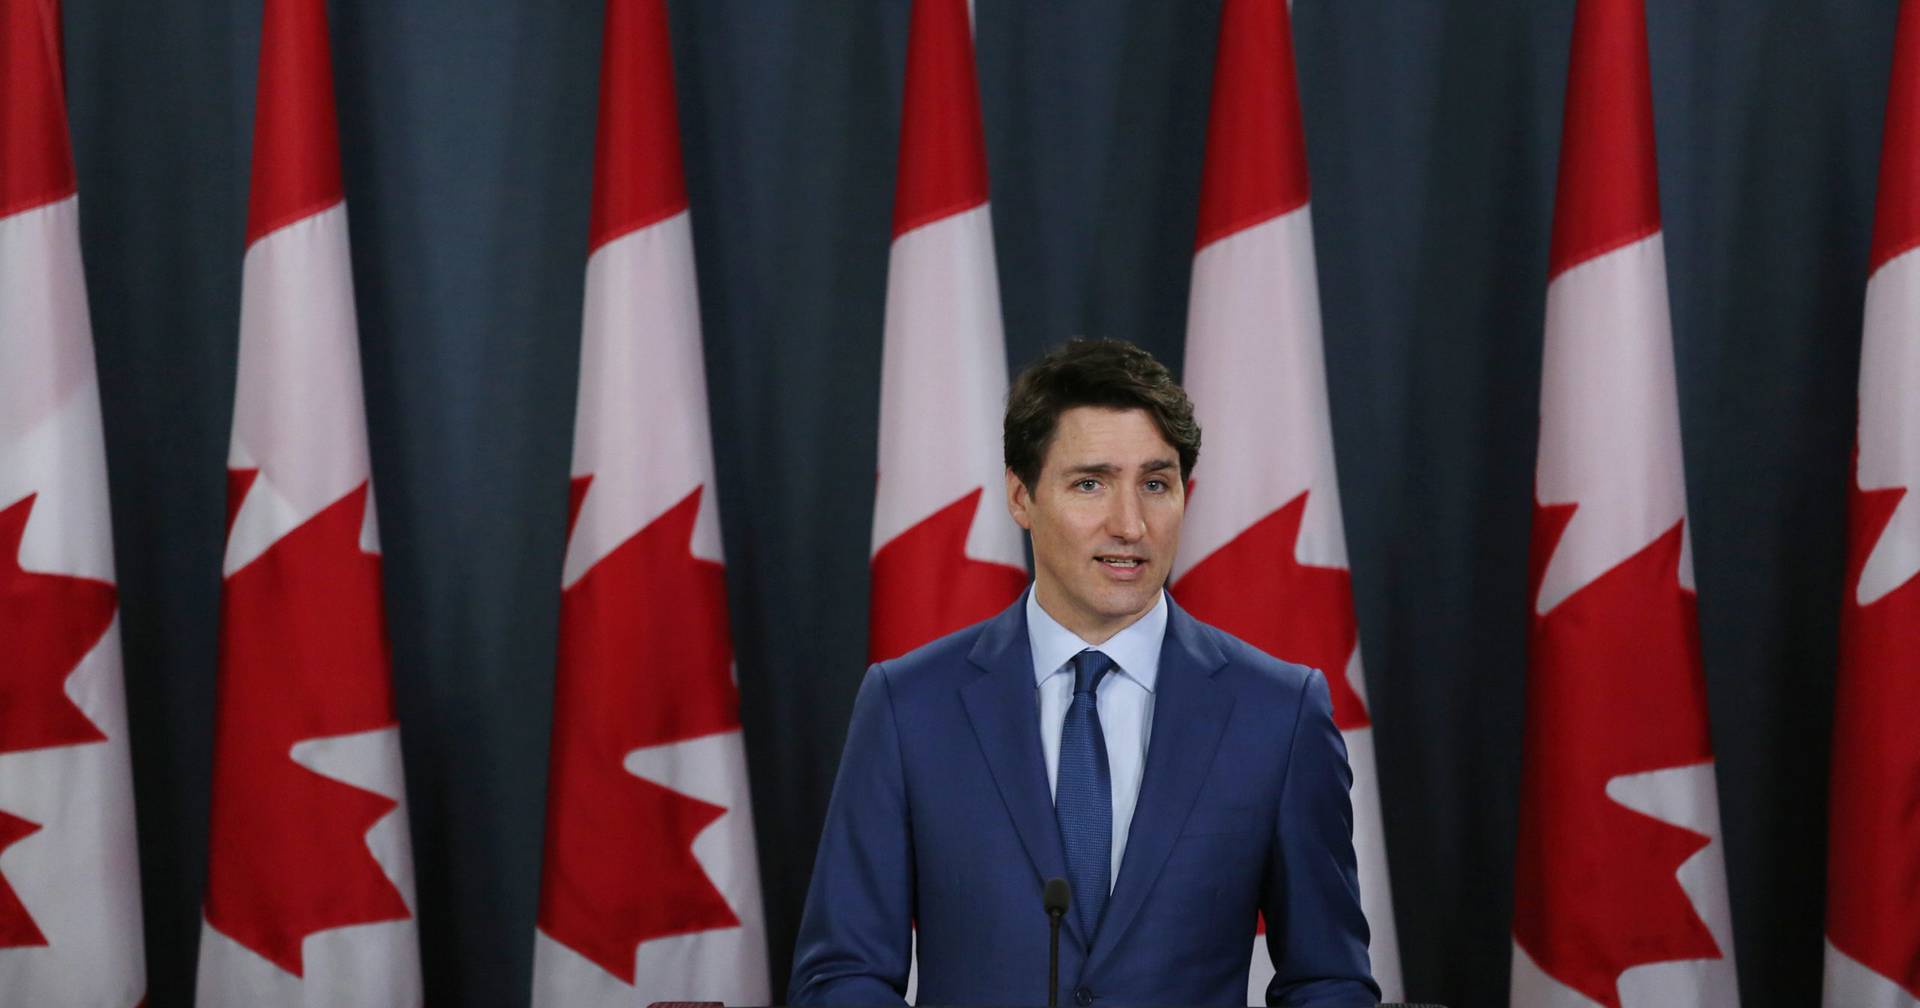 Canada accuses Russia and China of election interference